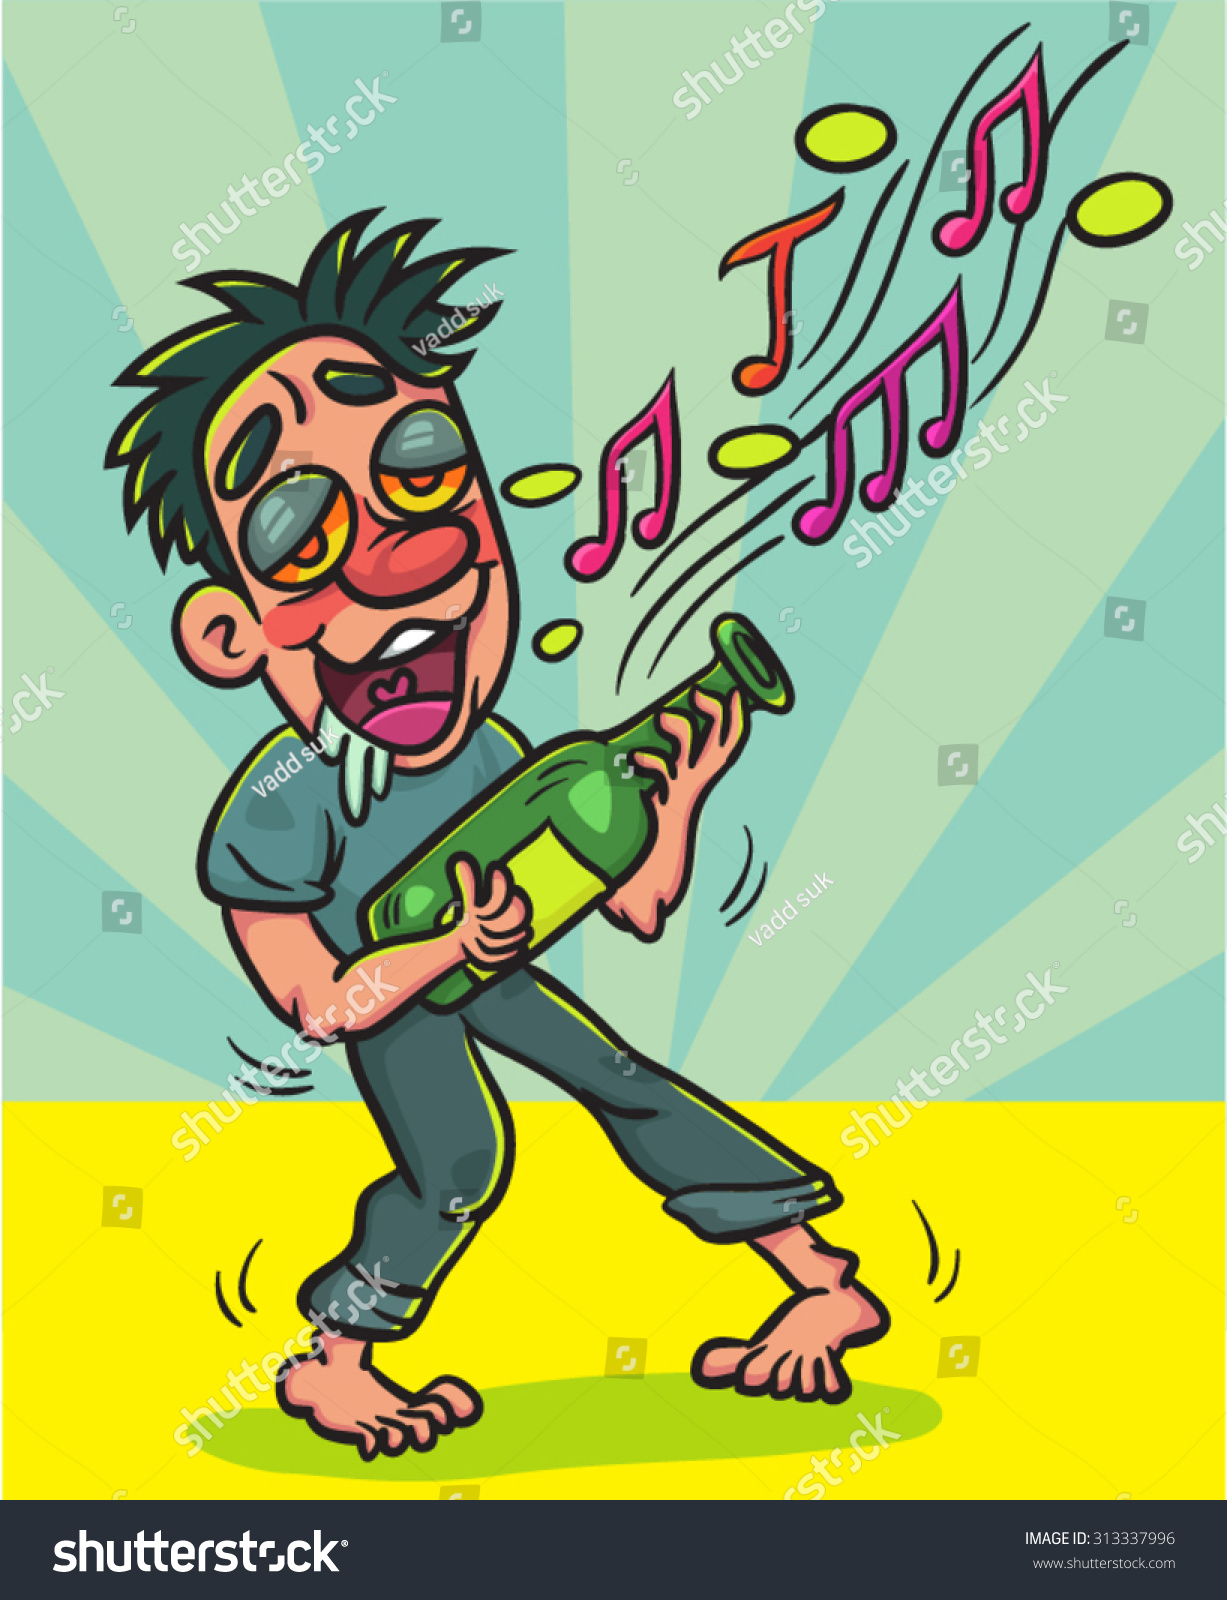 Cartoon Happy Drunk Man With Bottle Singing And Dancing, Illustration